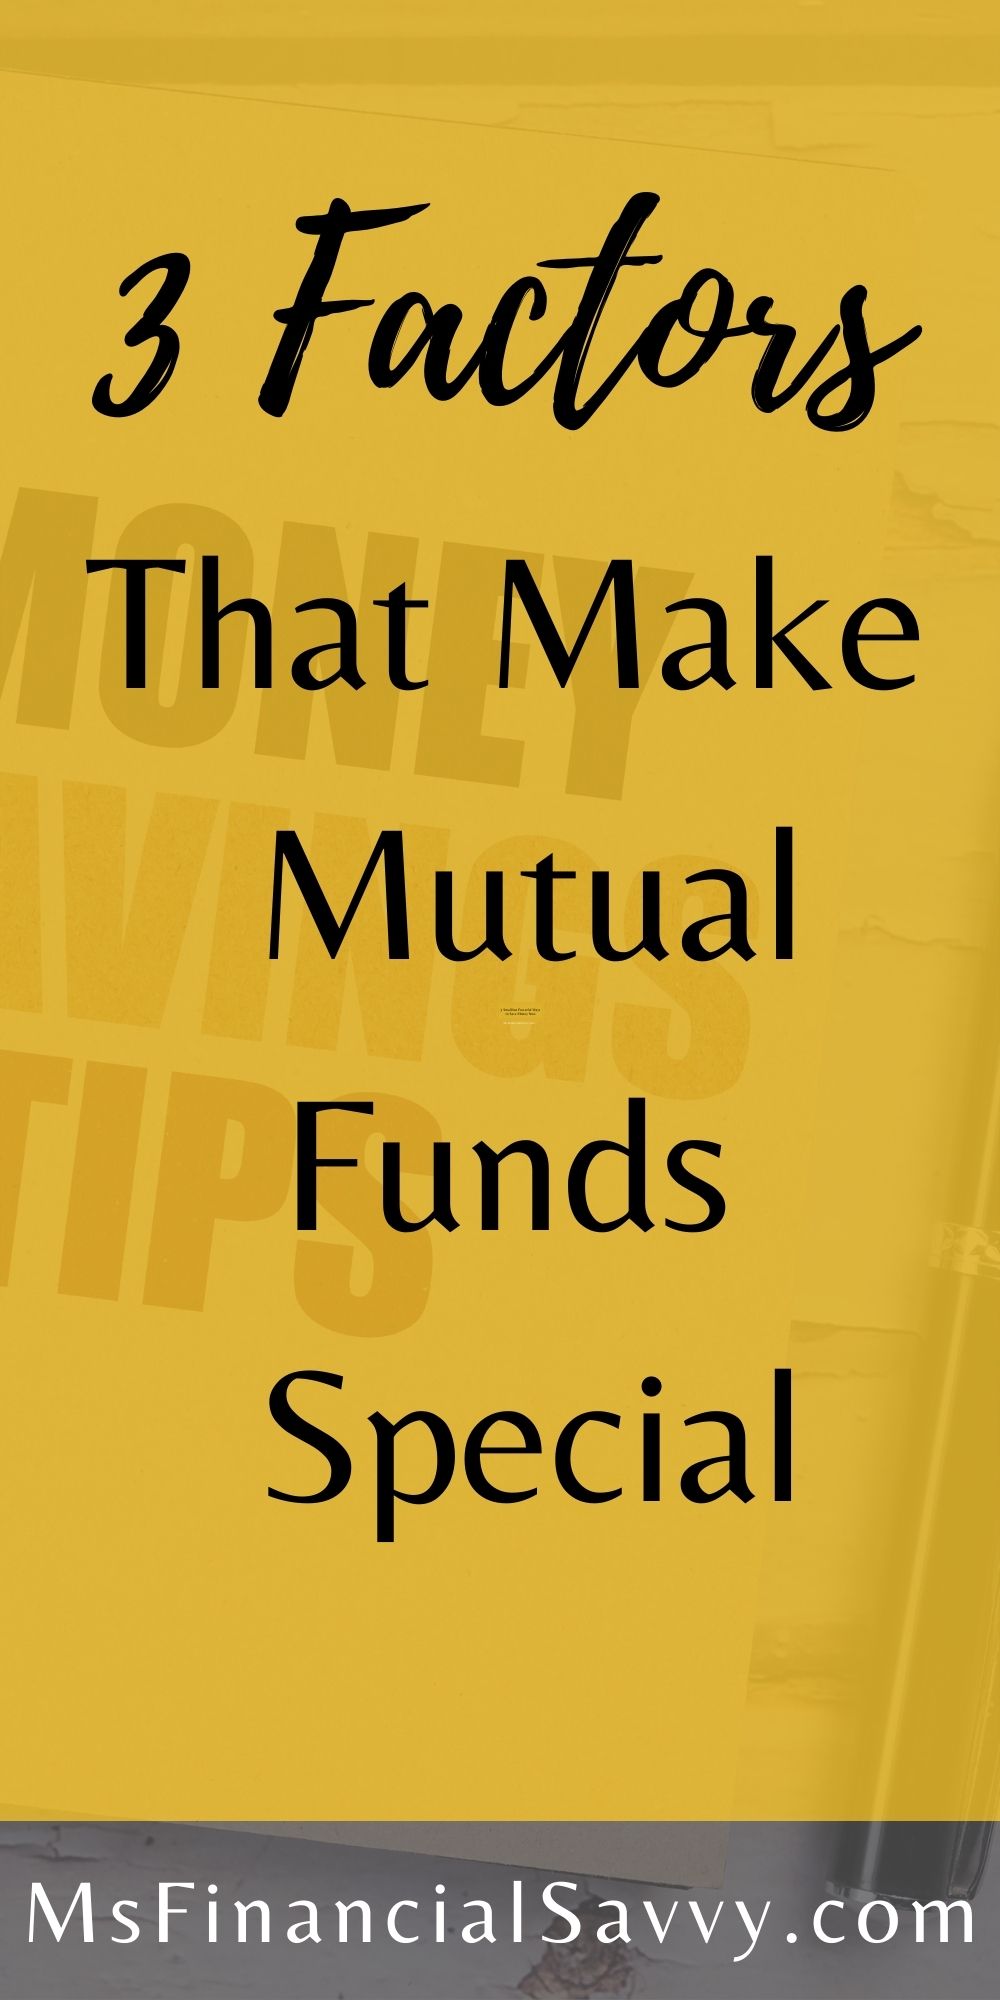 3 factors that make mutual funds special